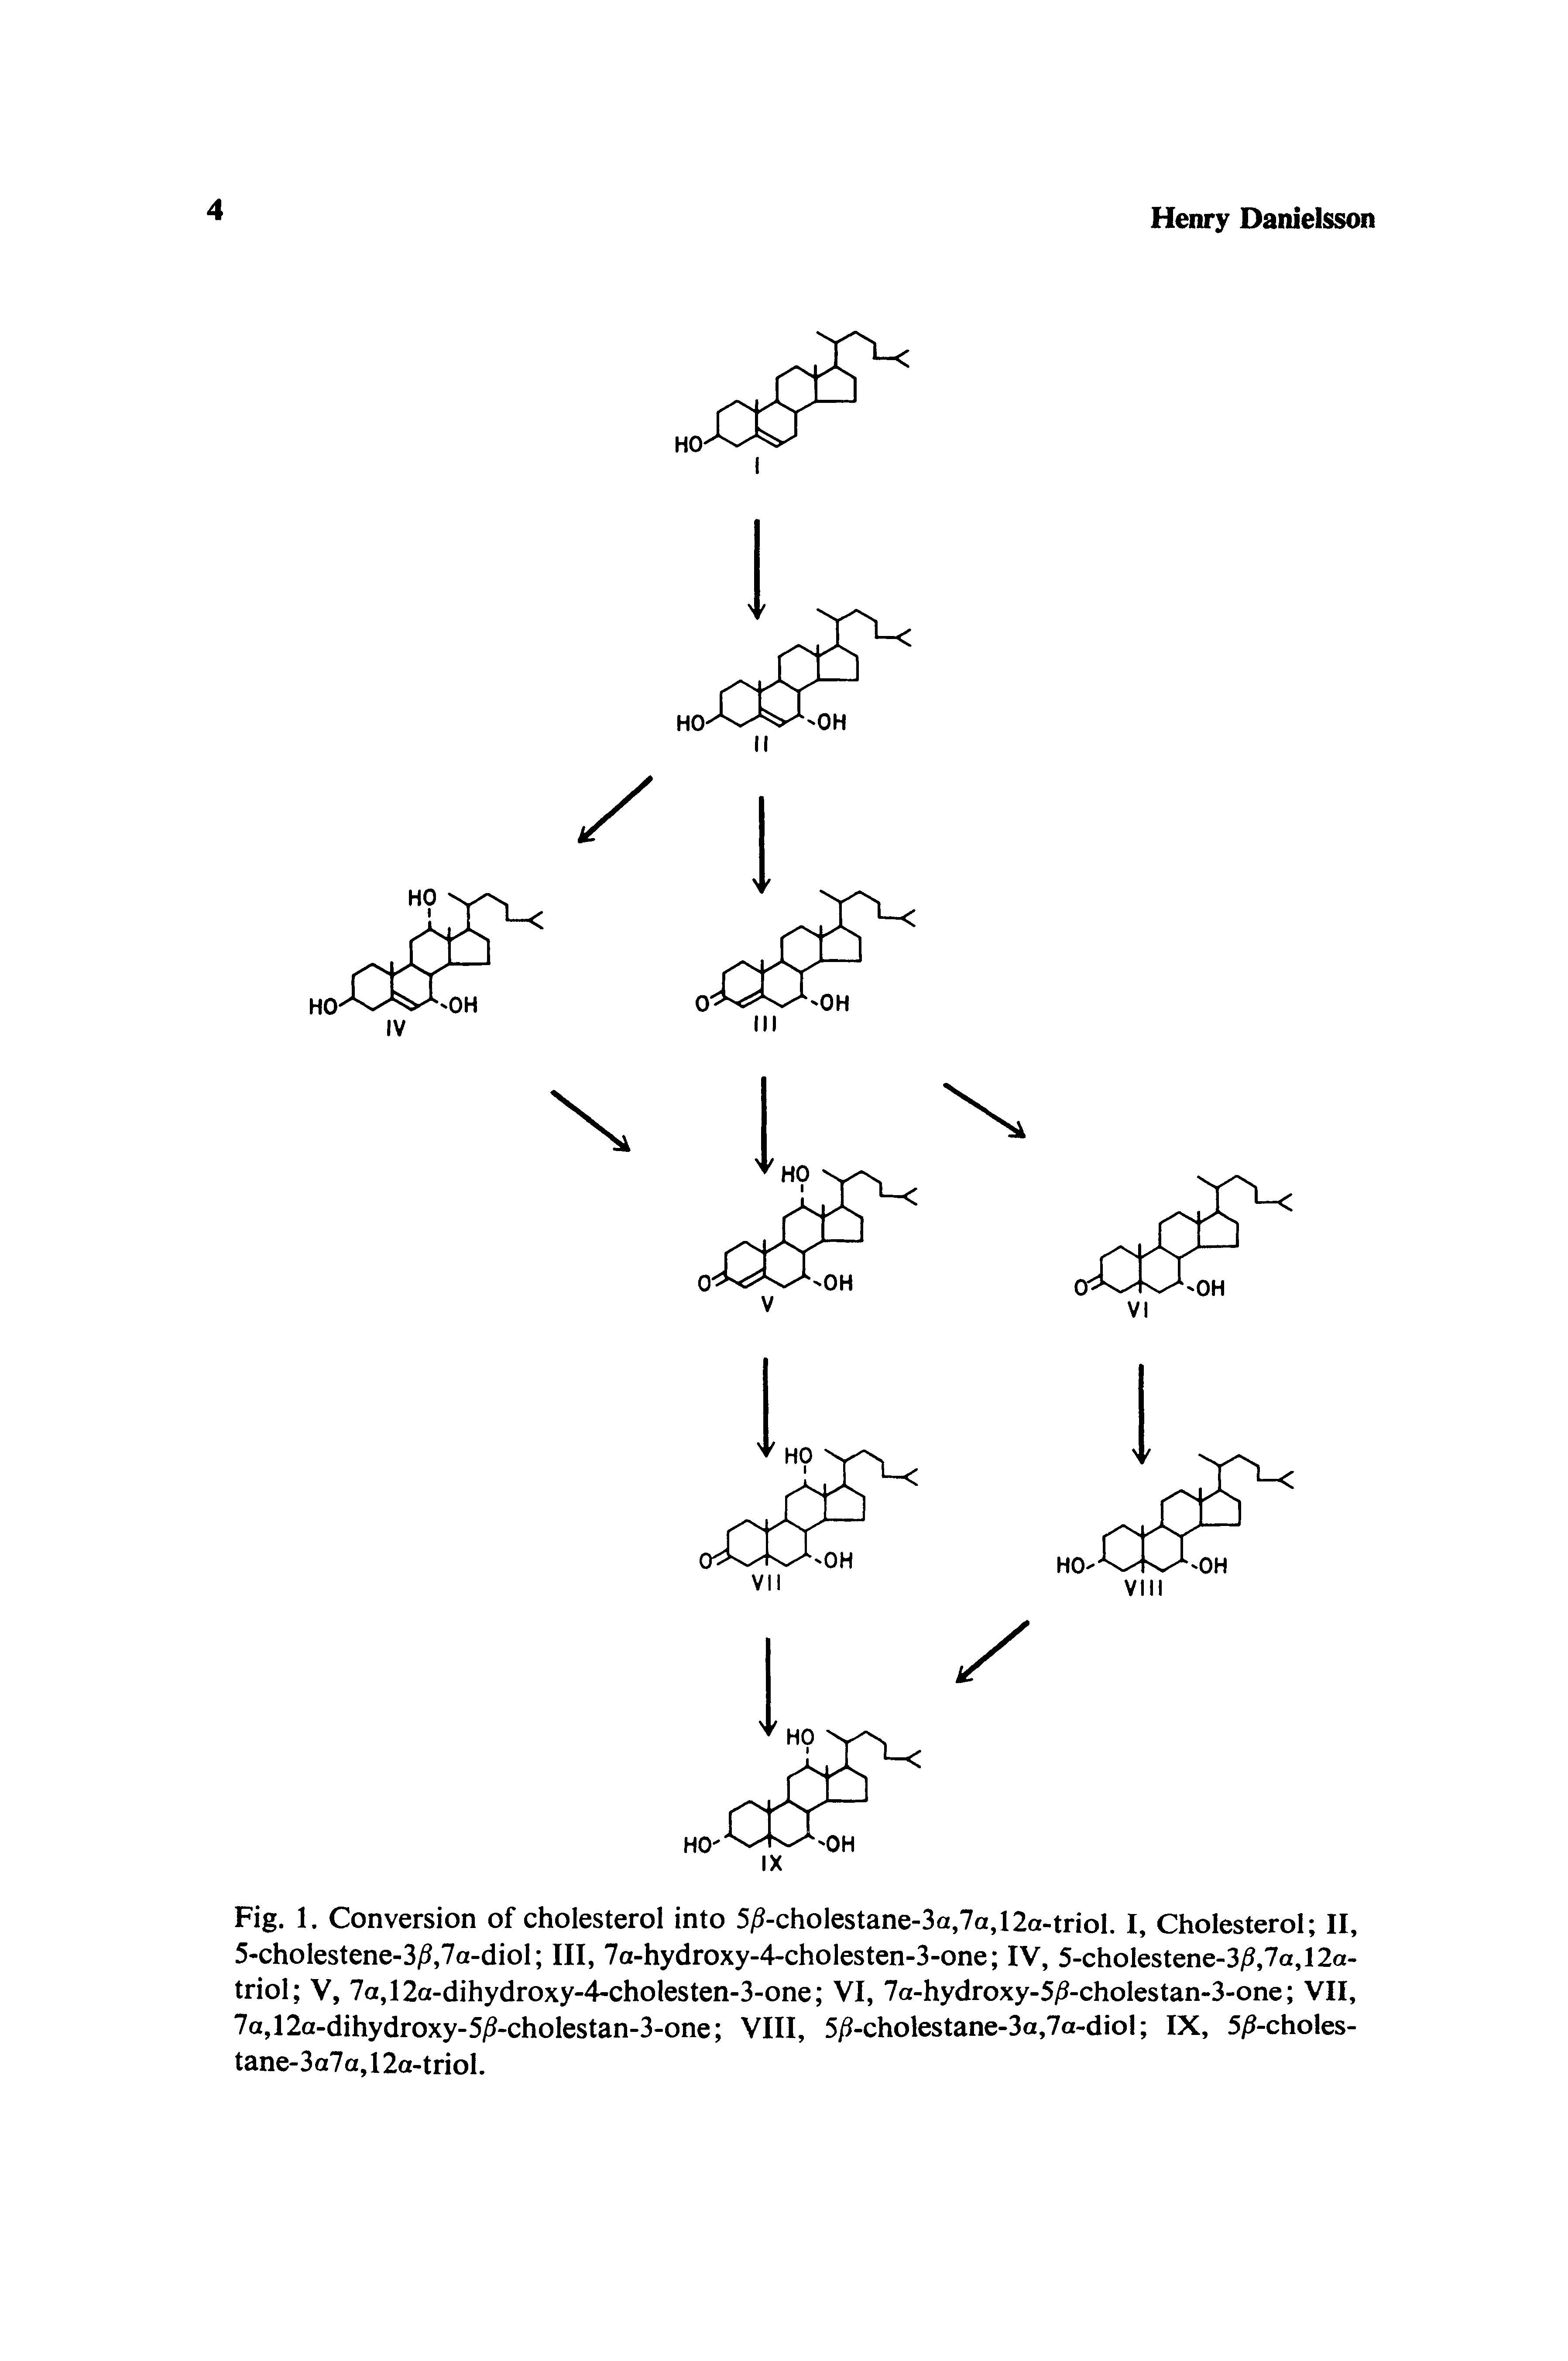 Fig. 1. Conversion of cholesterol into 5i -cholestane-3a,7a,12a-triol. I, Cholesterol II, 5-cholestene-3i5,7a-diol III, 7a-hydroxy-4-cholesten-3-one IV, 5-cholestene-3/5,7a,12a-triol V, 7a,12a-dihydroxy-4-cholesten-3-one VI, 7a-hydroxy-5/5-cholestan-3-one VII, 7a,12a-dihydroxy-5/5-cholestan-3-one VIII, 5 -cholestane-3a,7a-dio IX, 5i -choIes-tane-3a7a, 12a-triol.